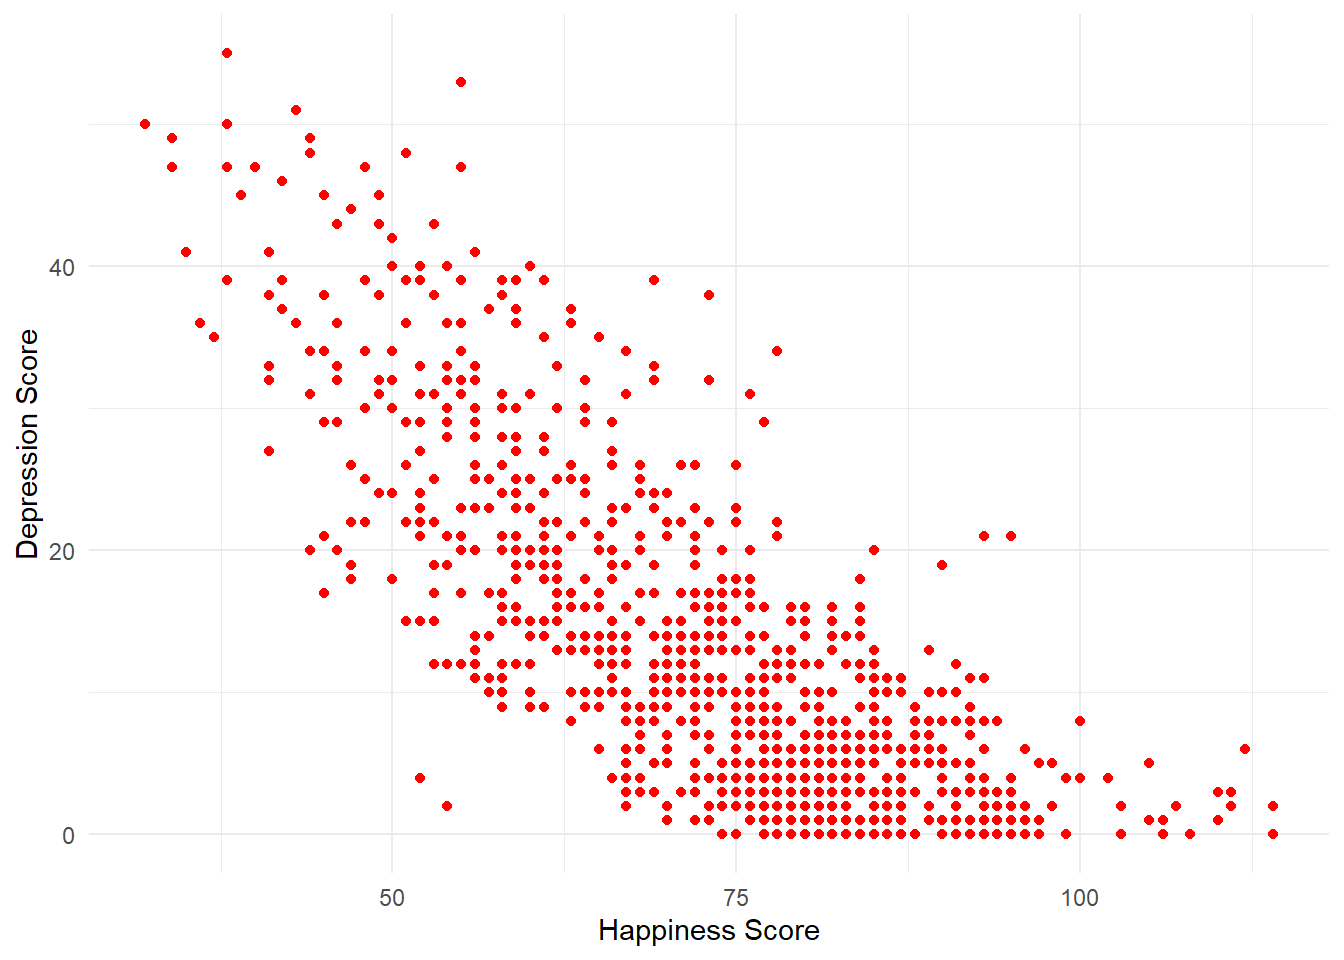 Scatterplot of happiness and depression scores